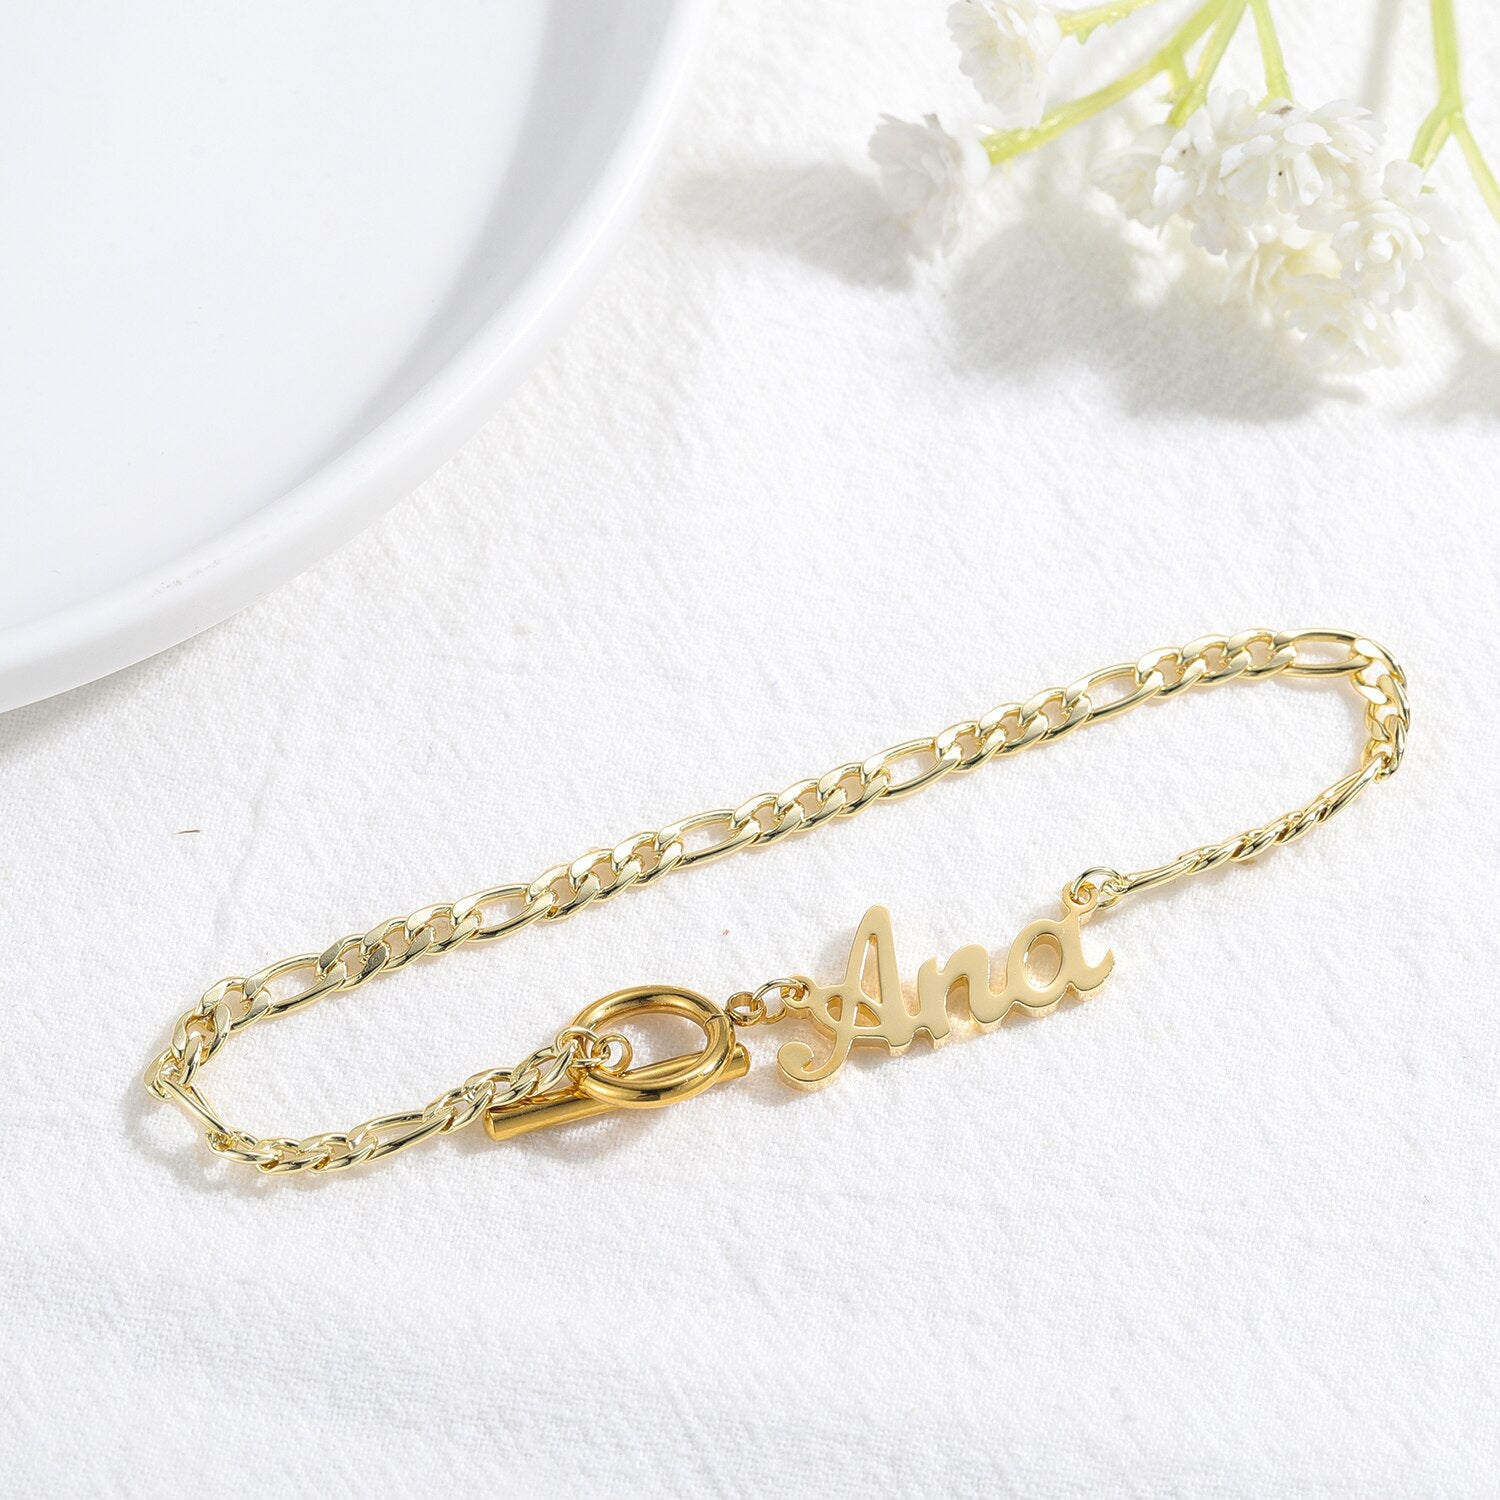 Personalised Name Gold Bracelet with Toggle Clasp